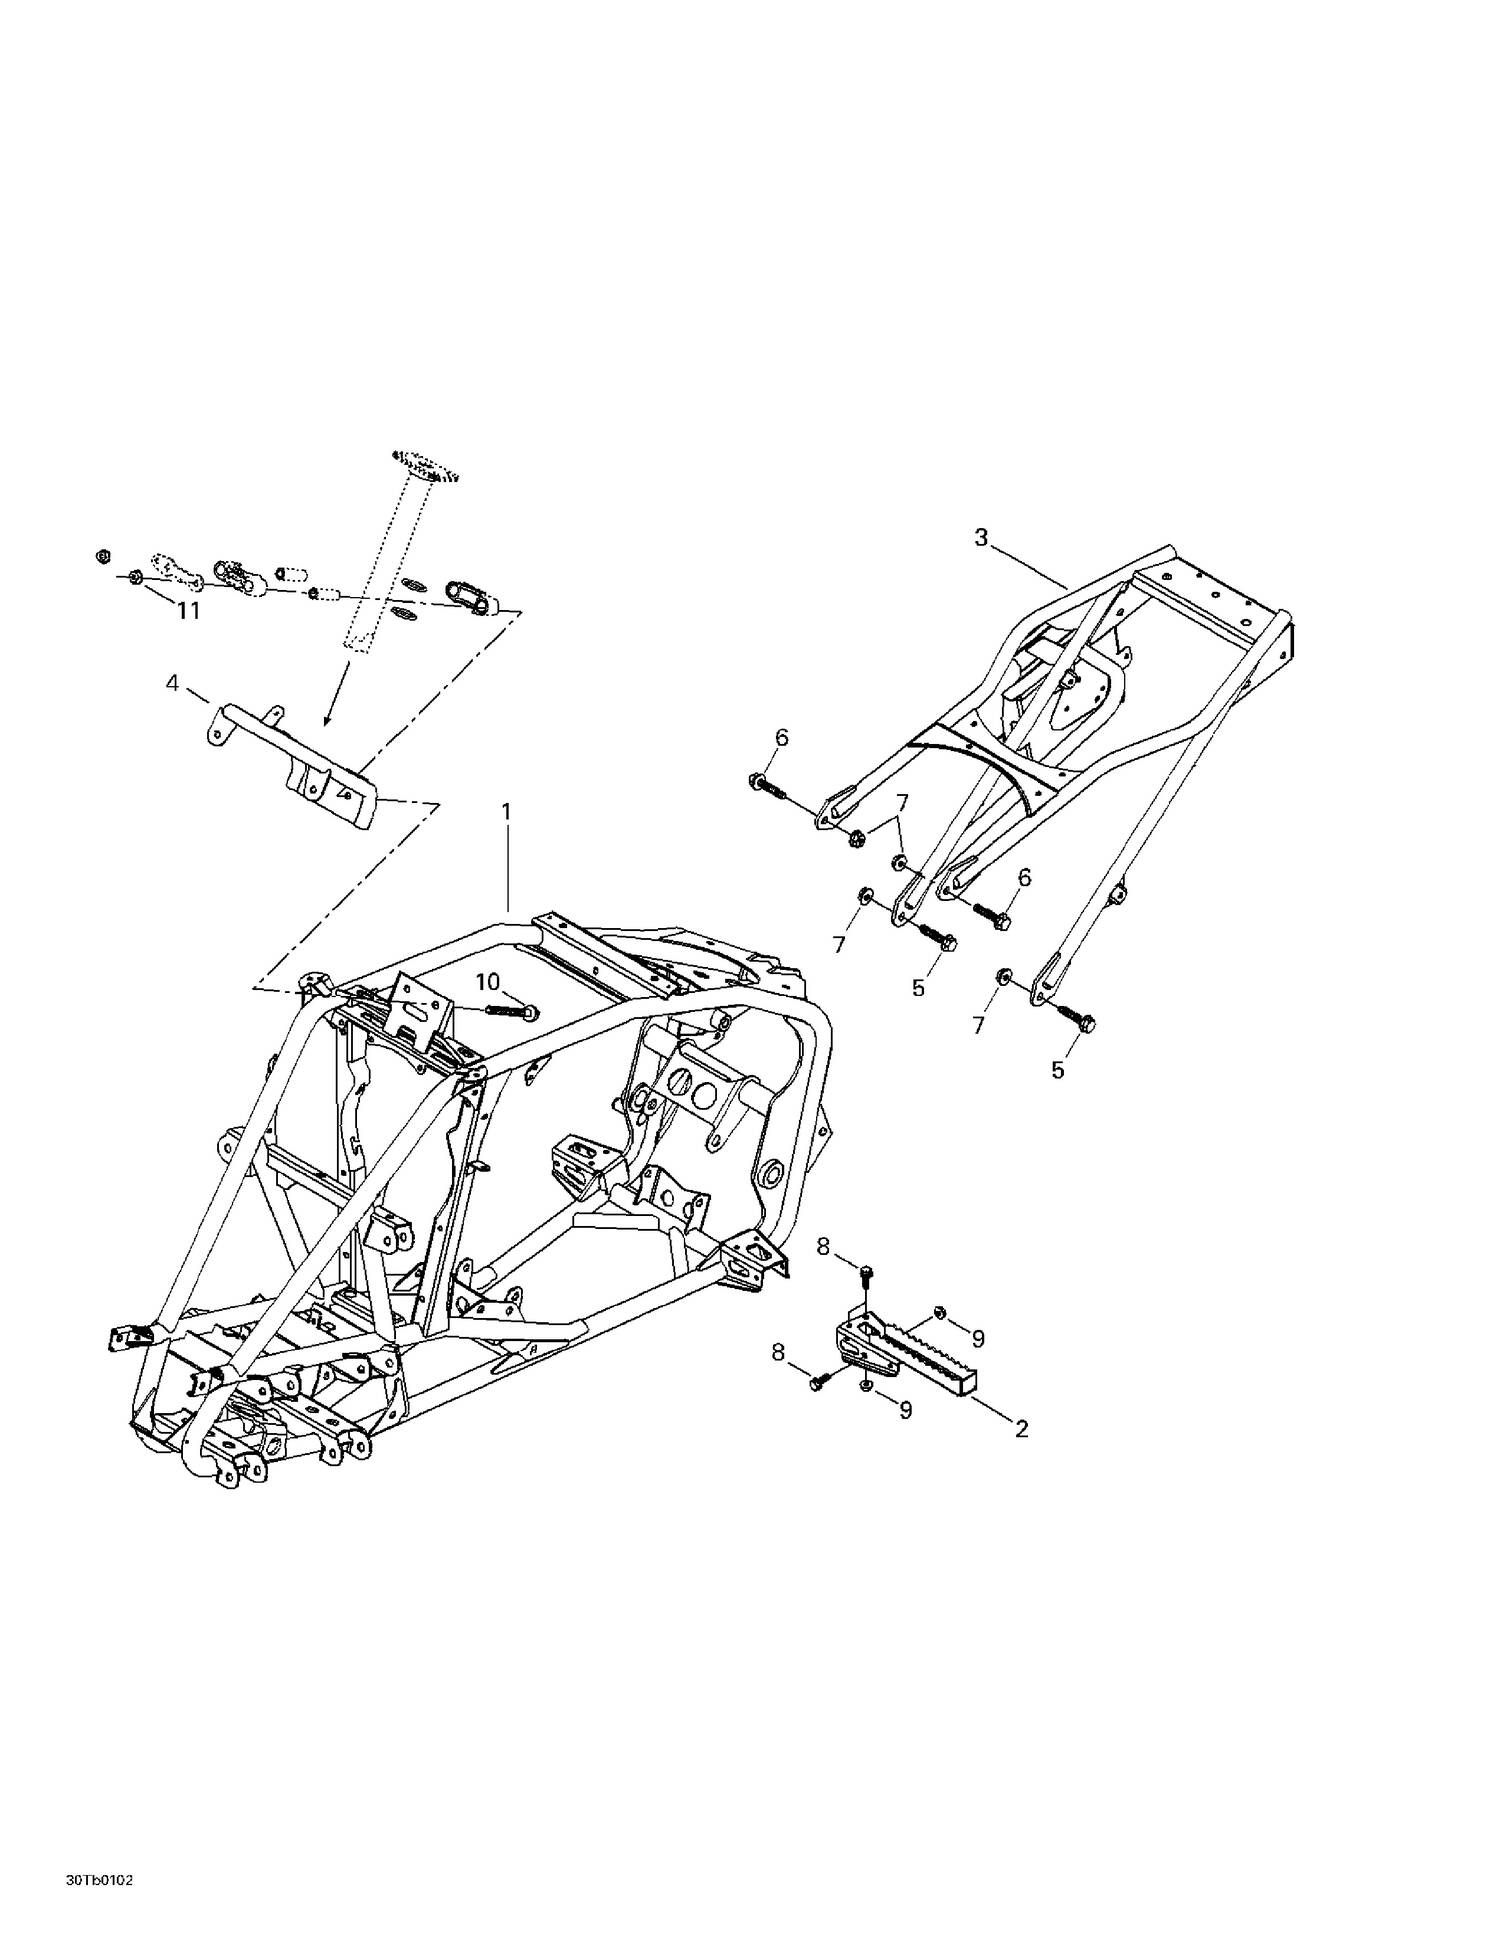 09 CHASSIS POUR DS 650 7404 2001